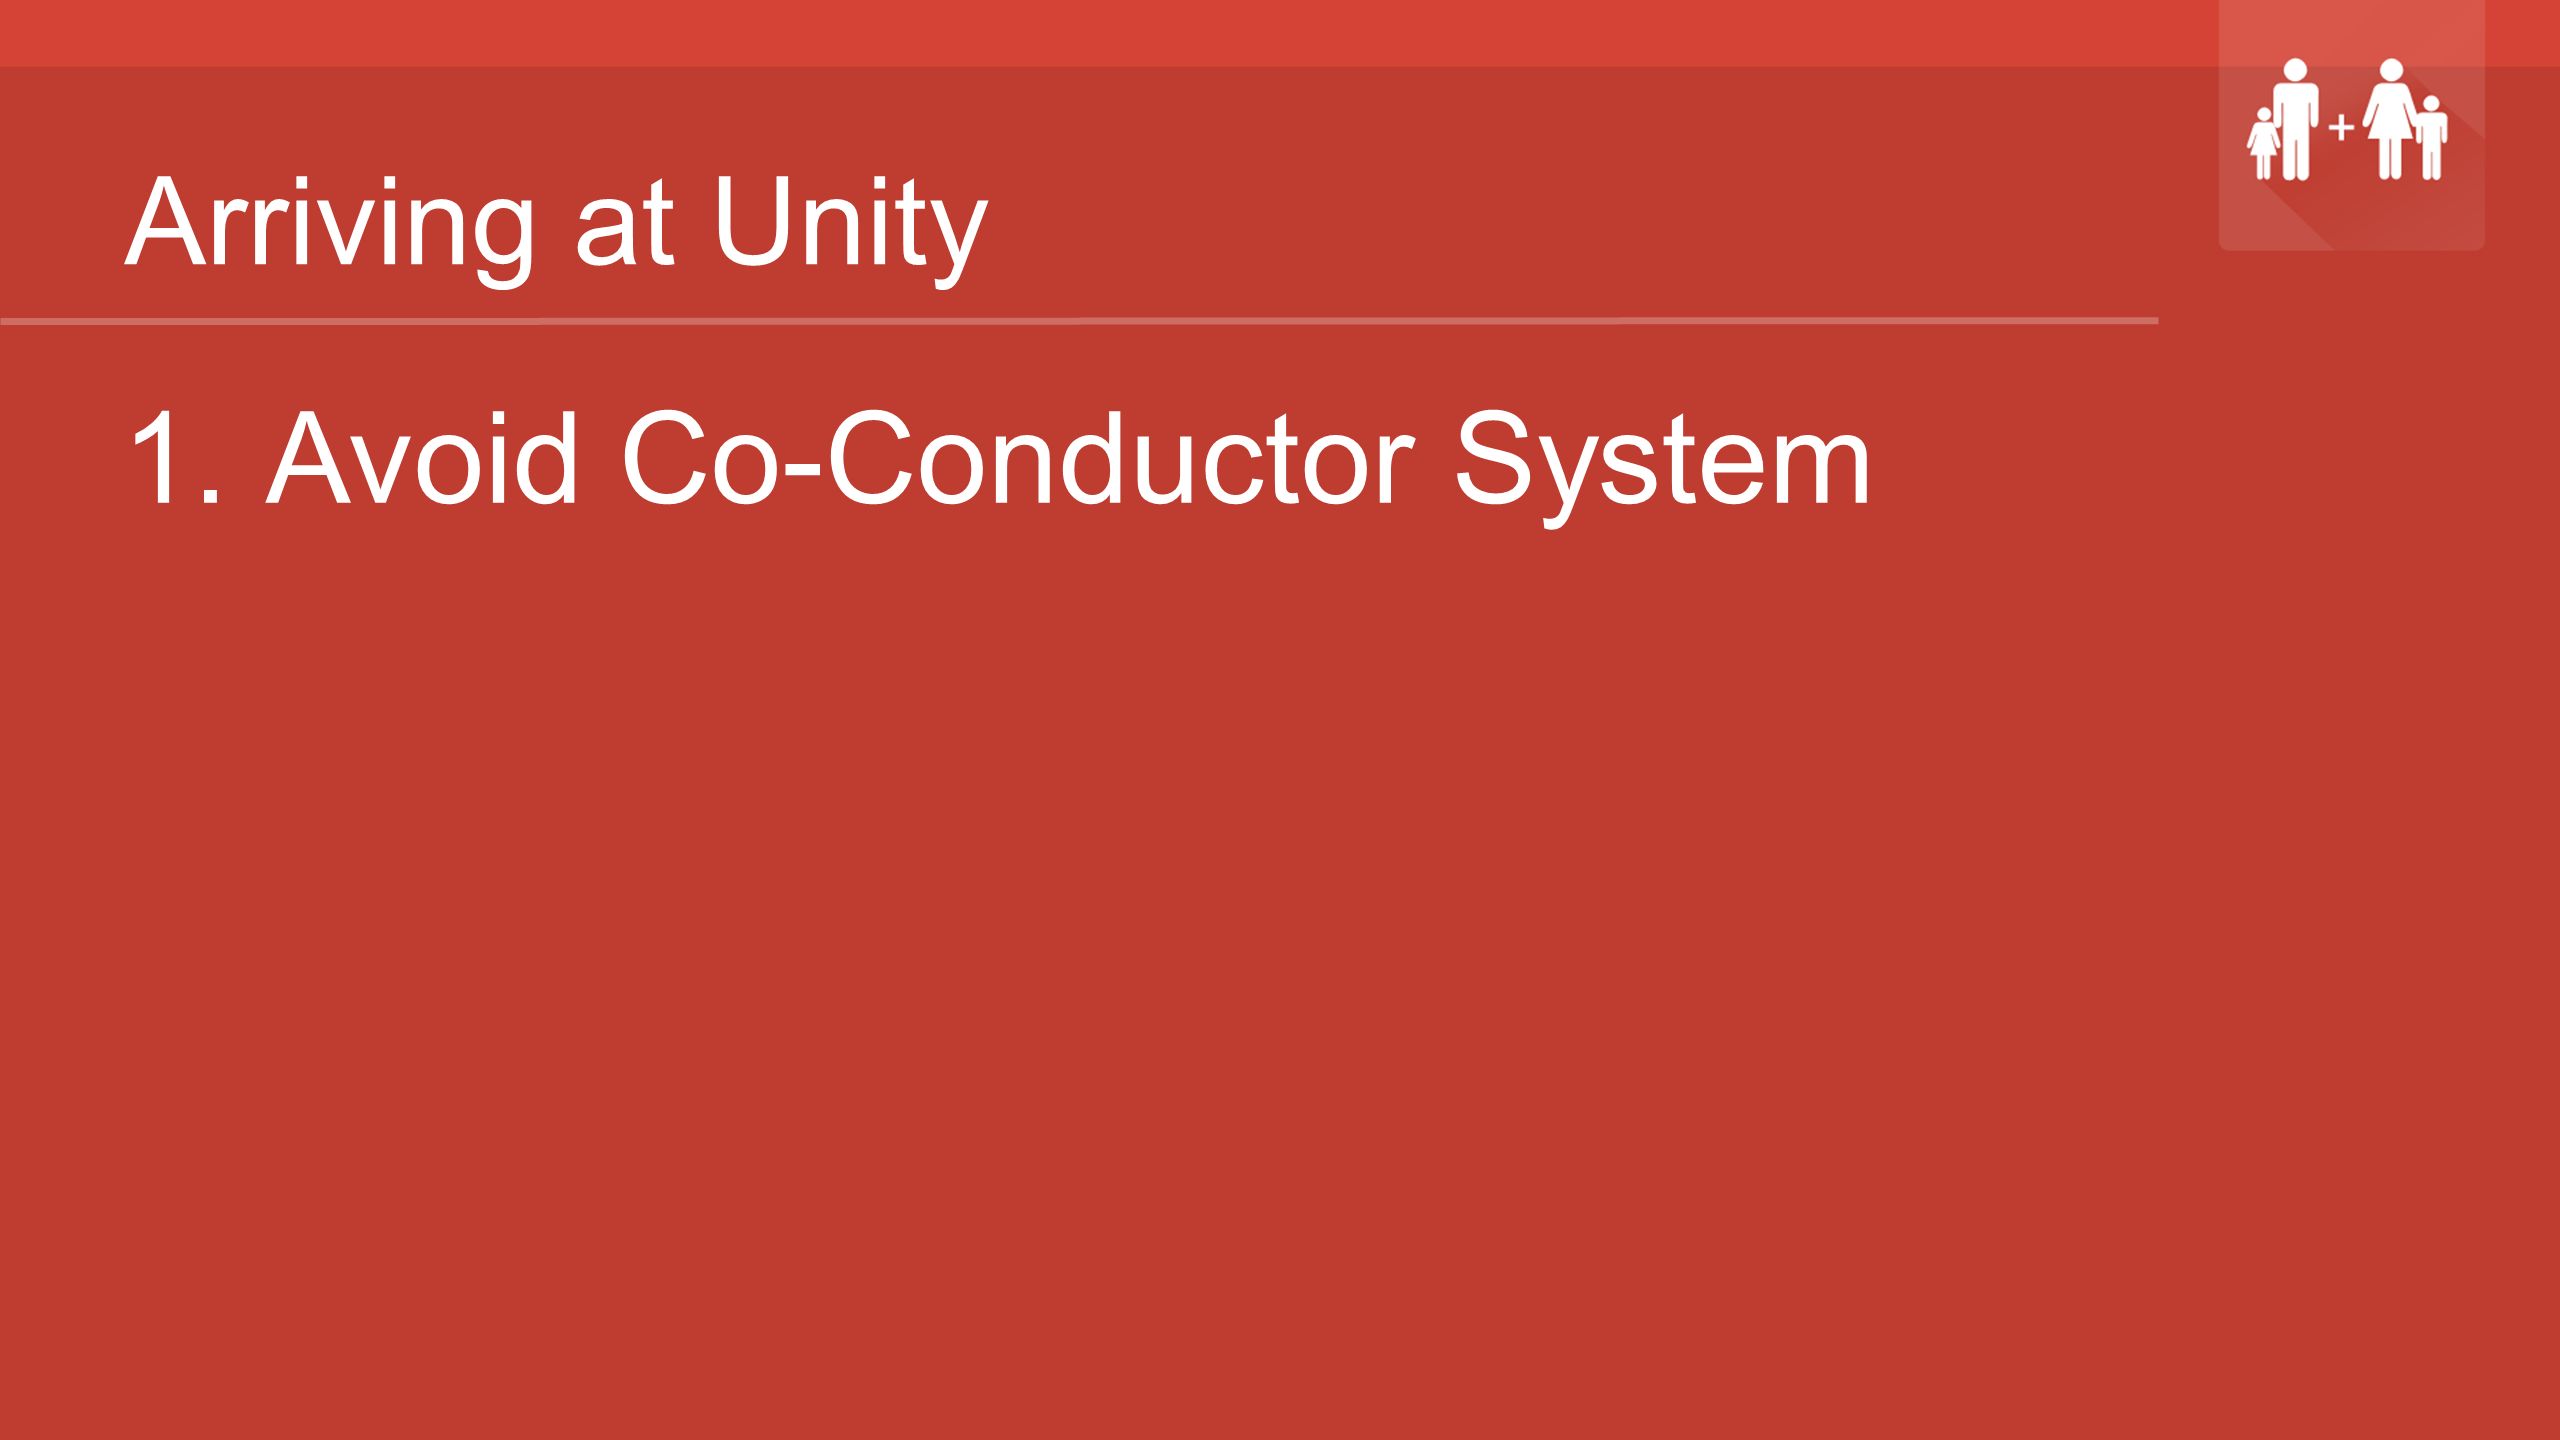 1. Avoid Co-Conductor System